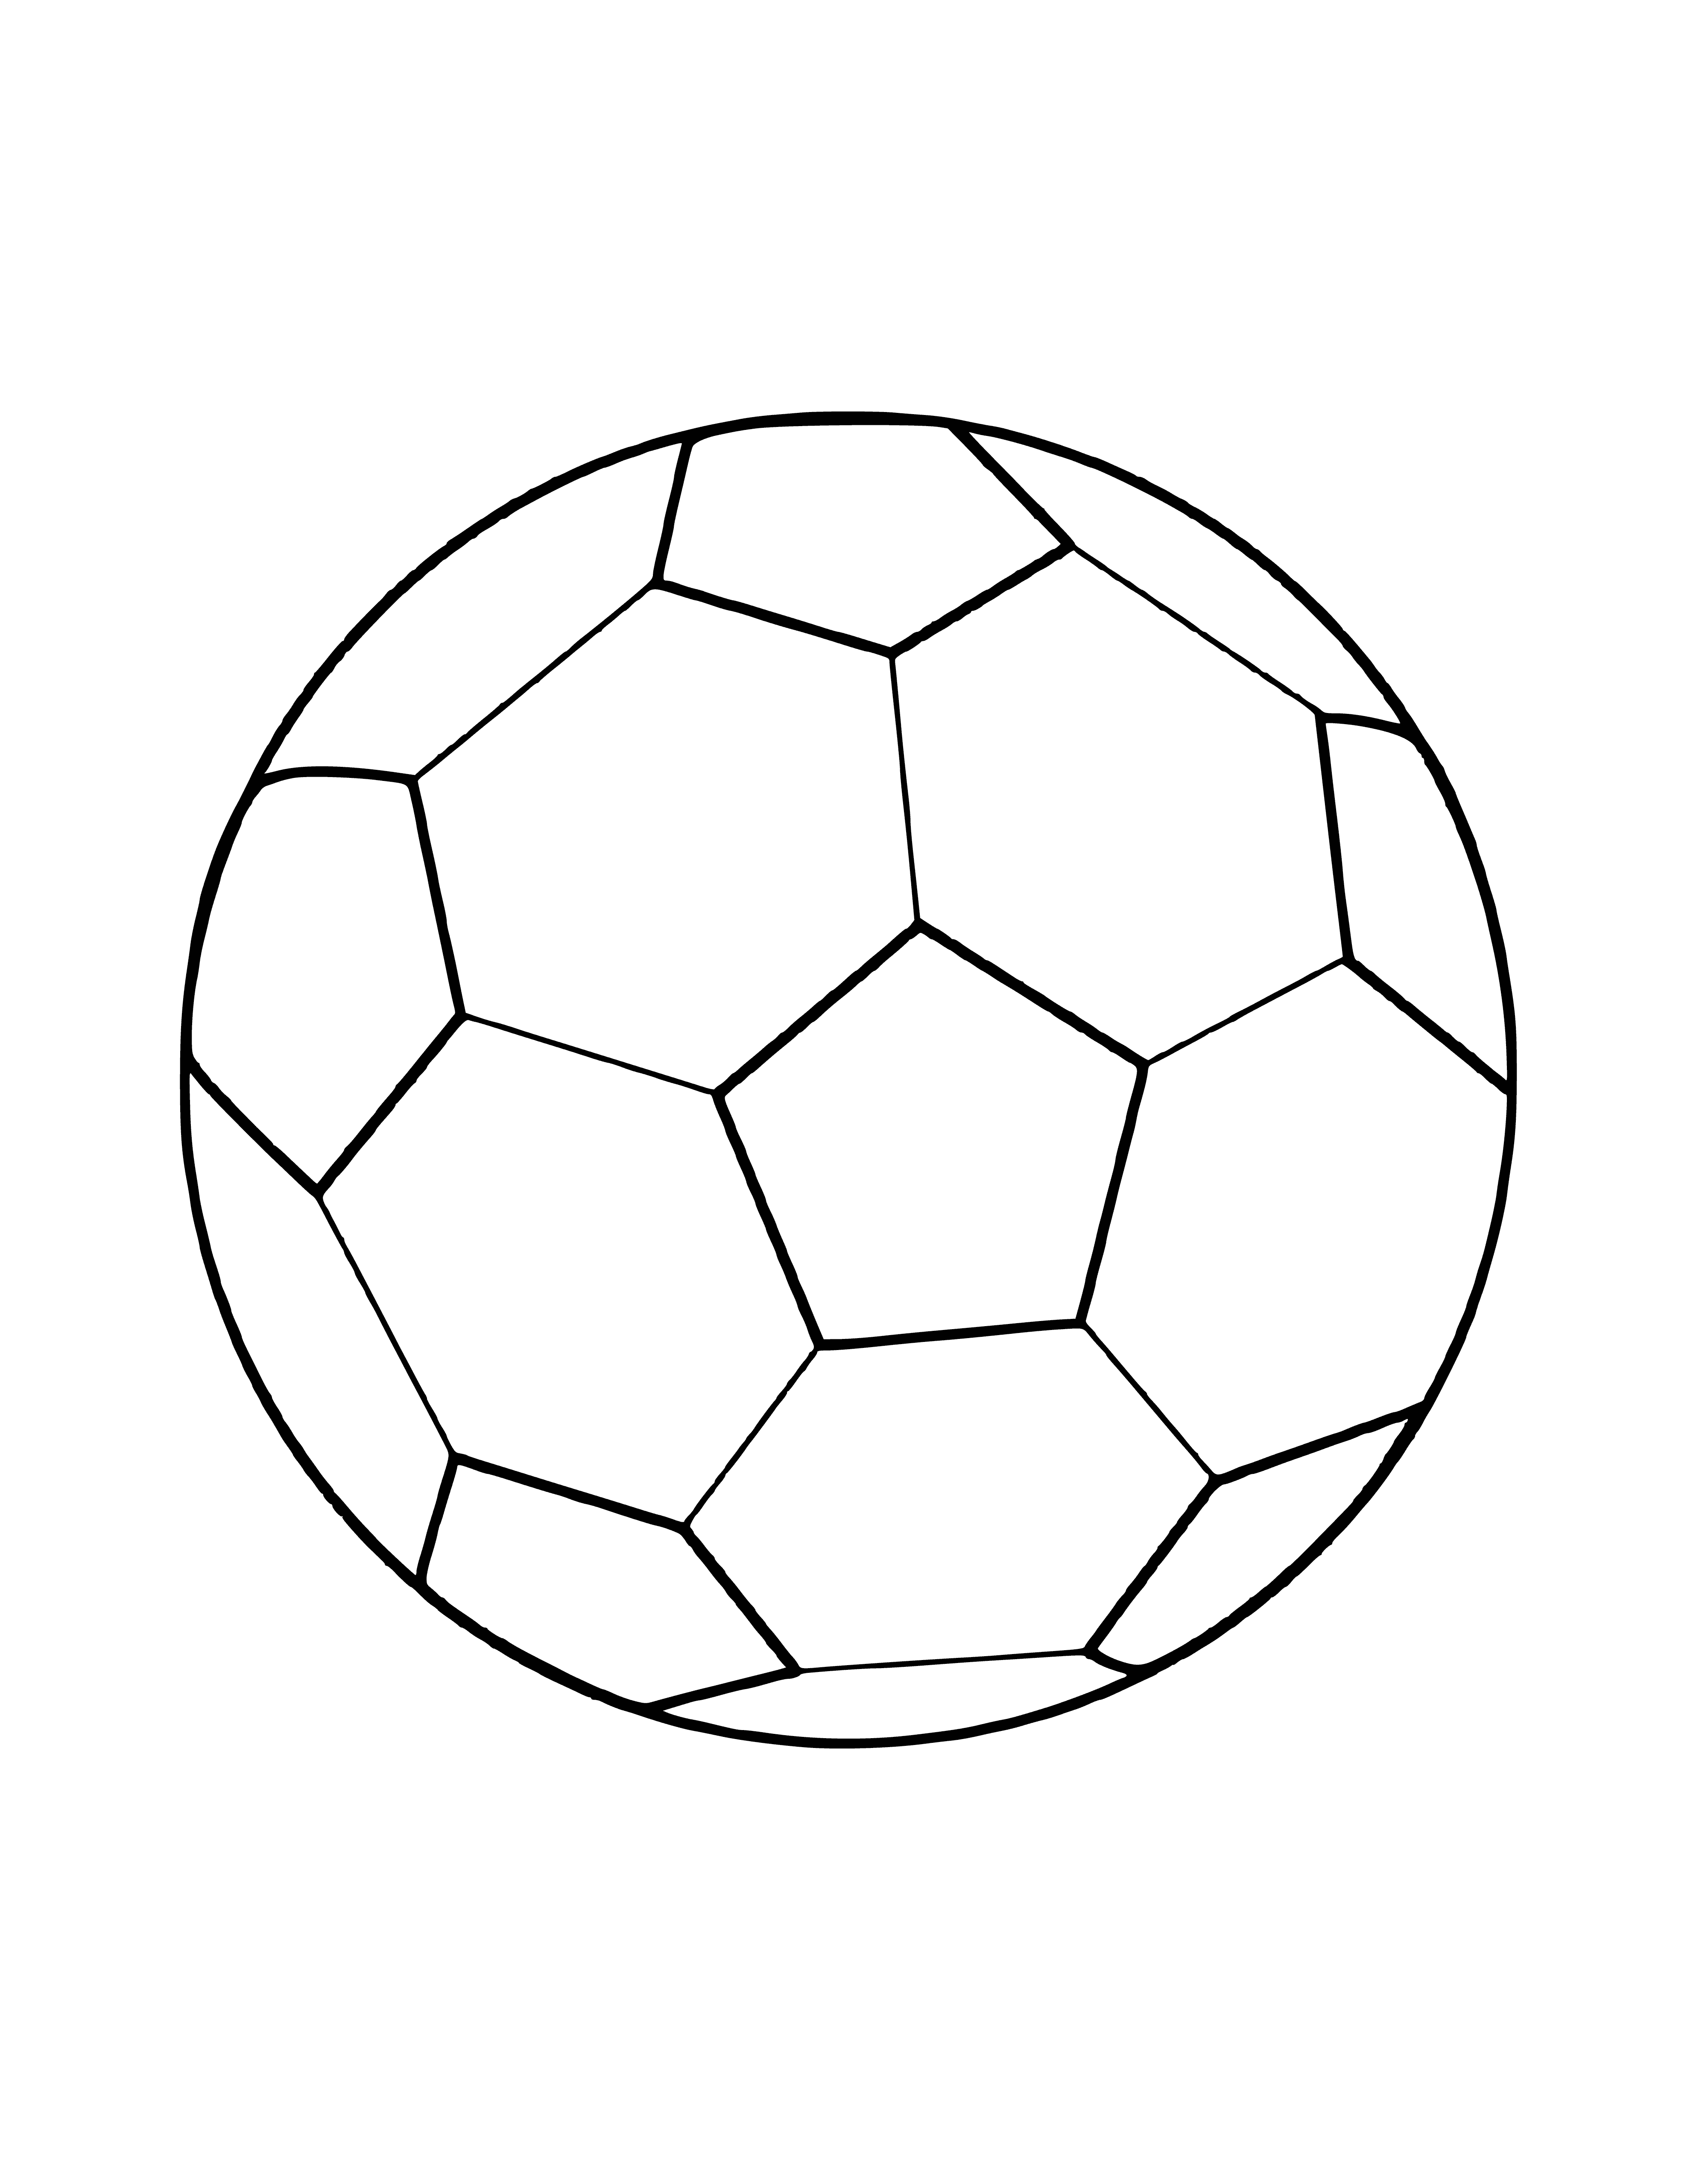 coloring page: Used for all ages, it's an affordable way to have fun and get exercise.

A black & white checkered soccer ball for all ages, providing fun & exercise at an affordable price.